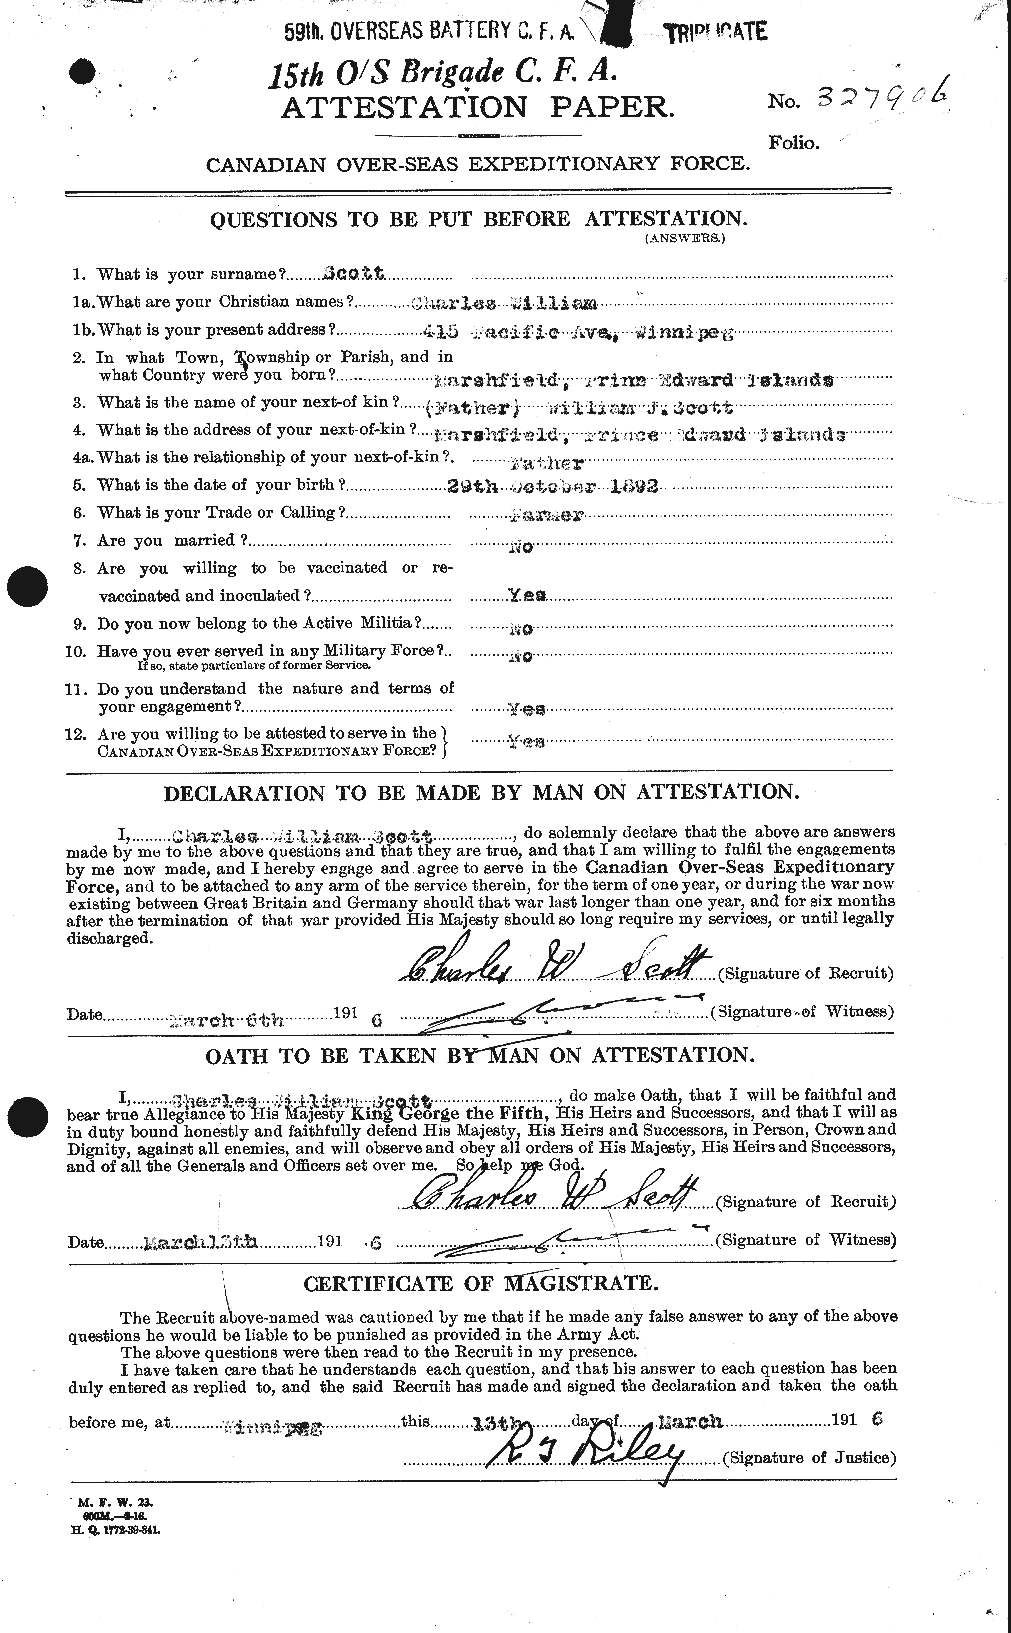 Personnel Records of the First World War - CEF 085869a